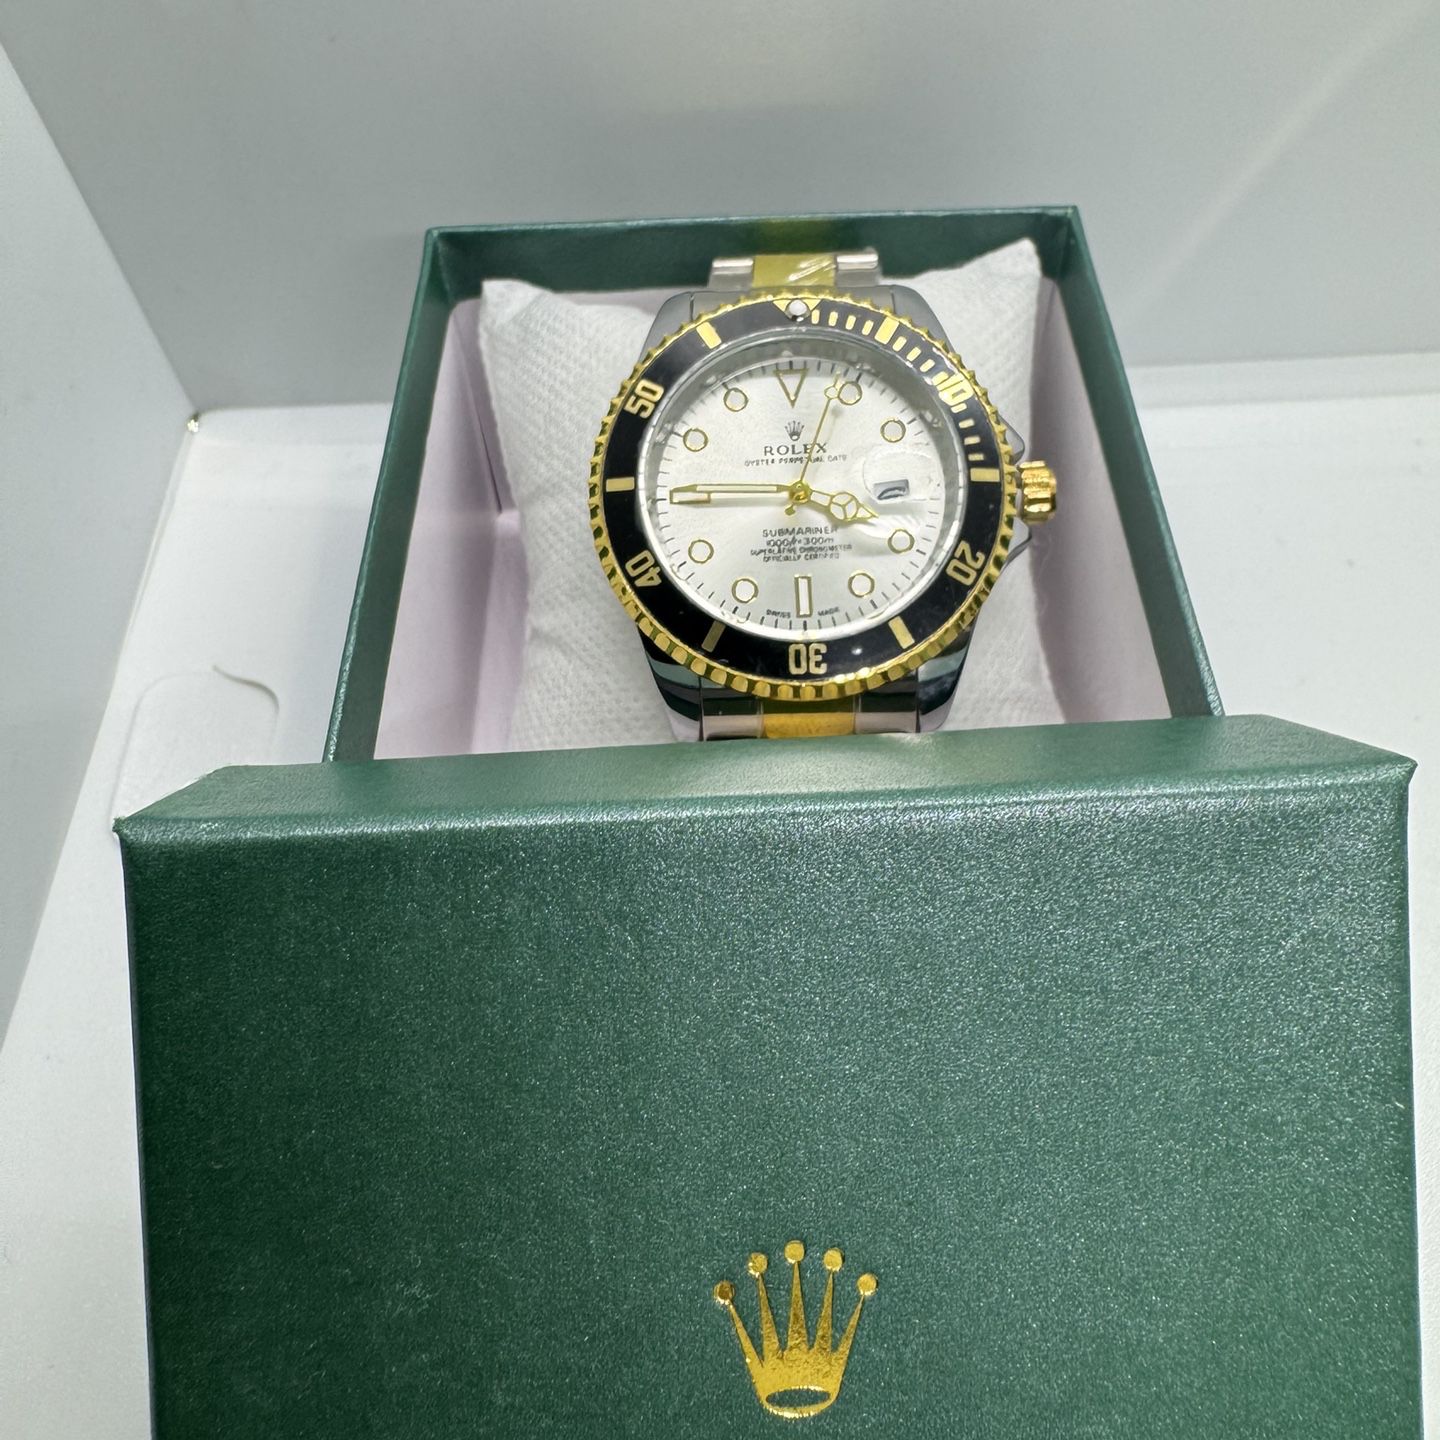 Brand New Silver Face / Black Bezel / 2 Tone Band Designer Watch With Box! 